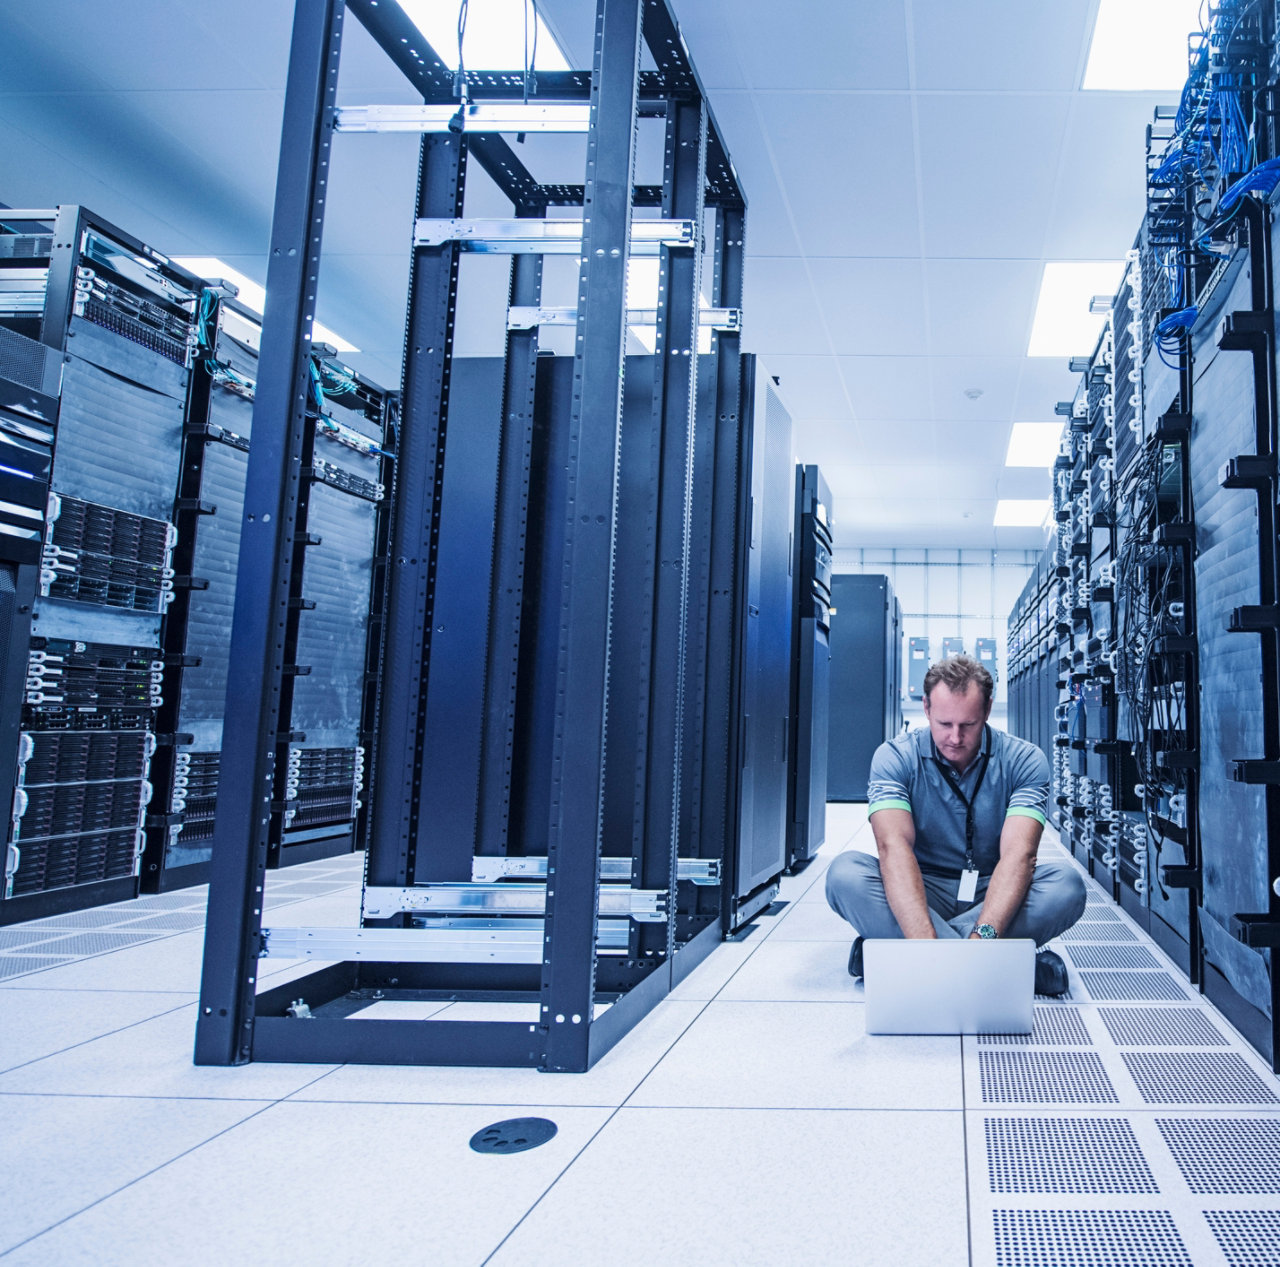 Man sitting on floor and using laptop in server room